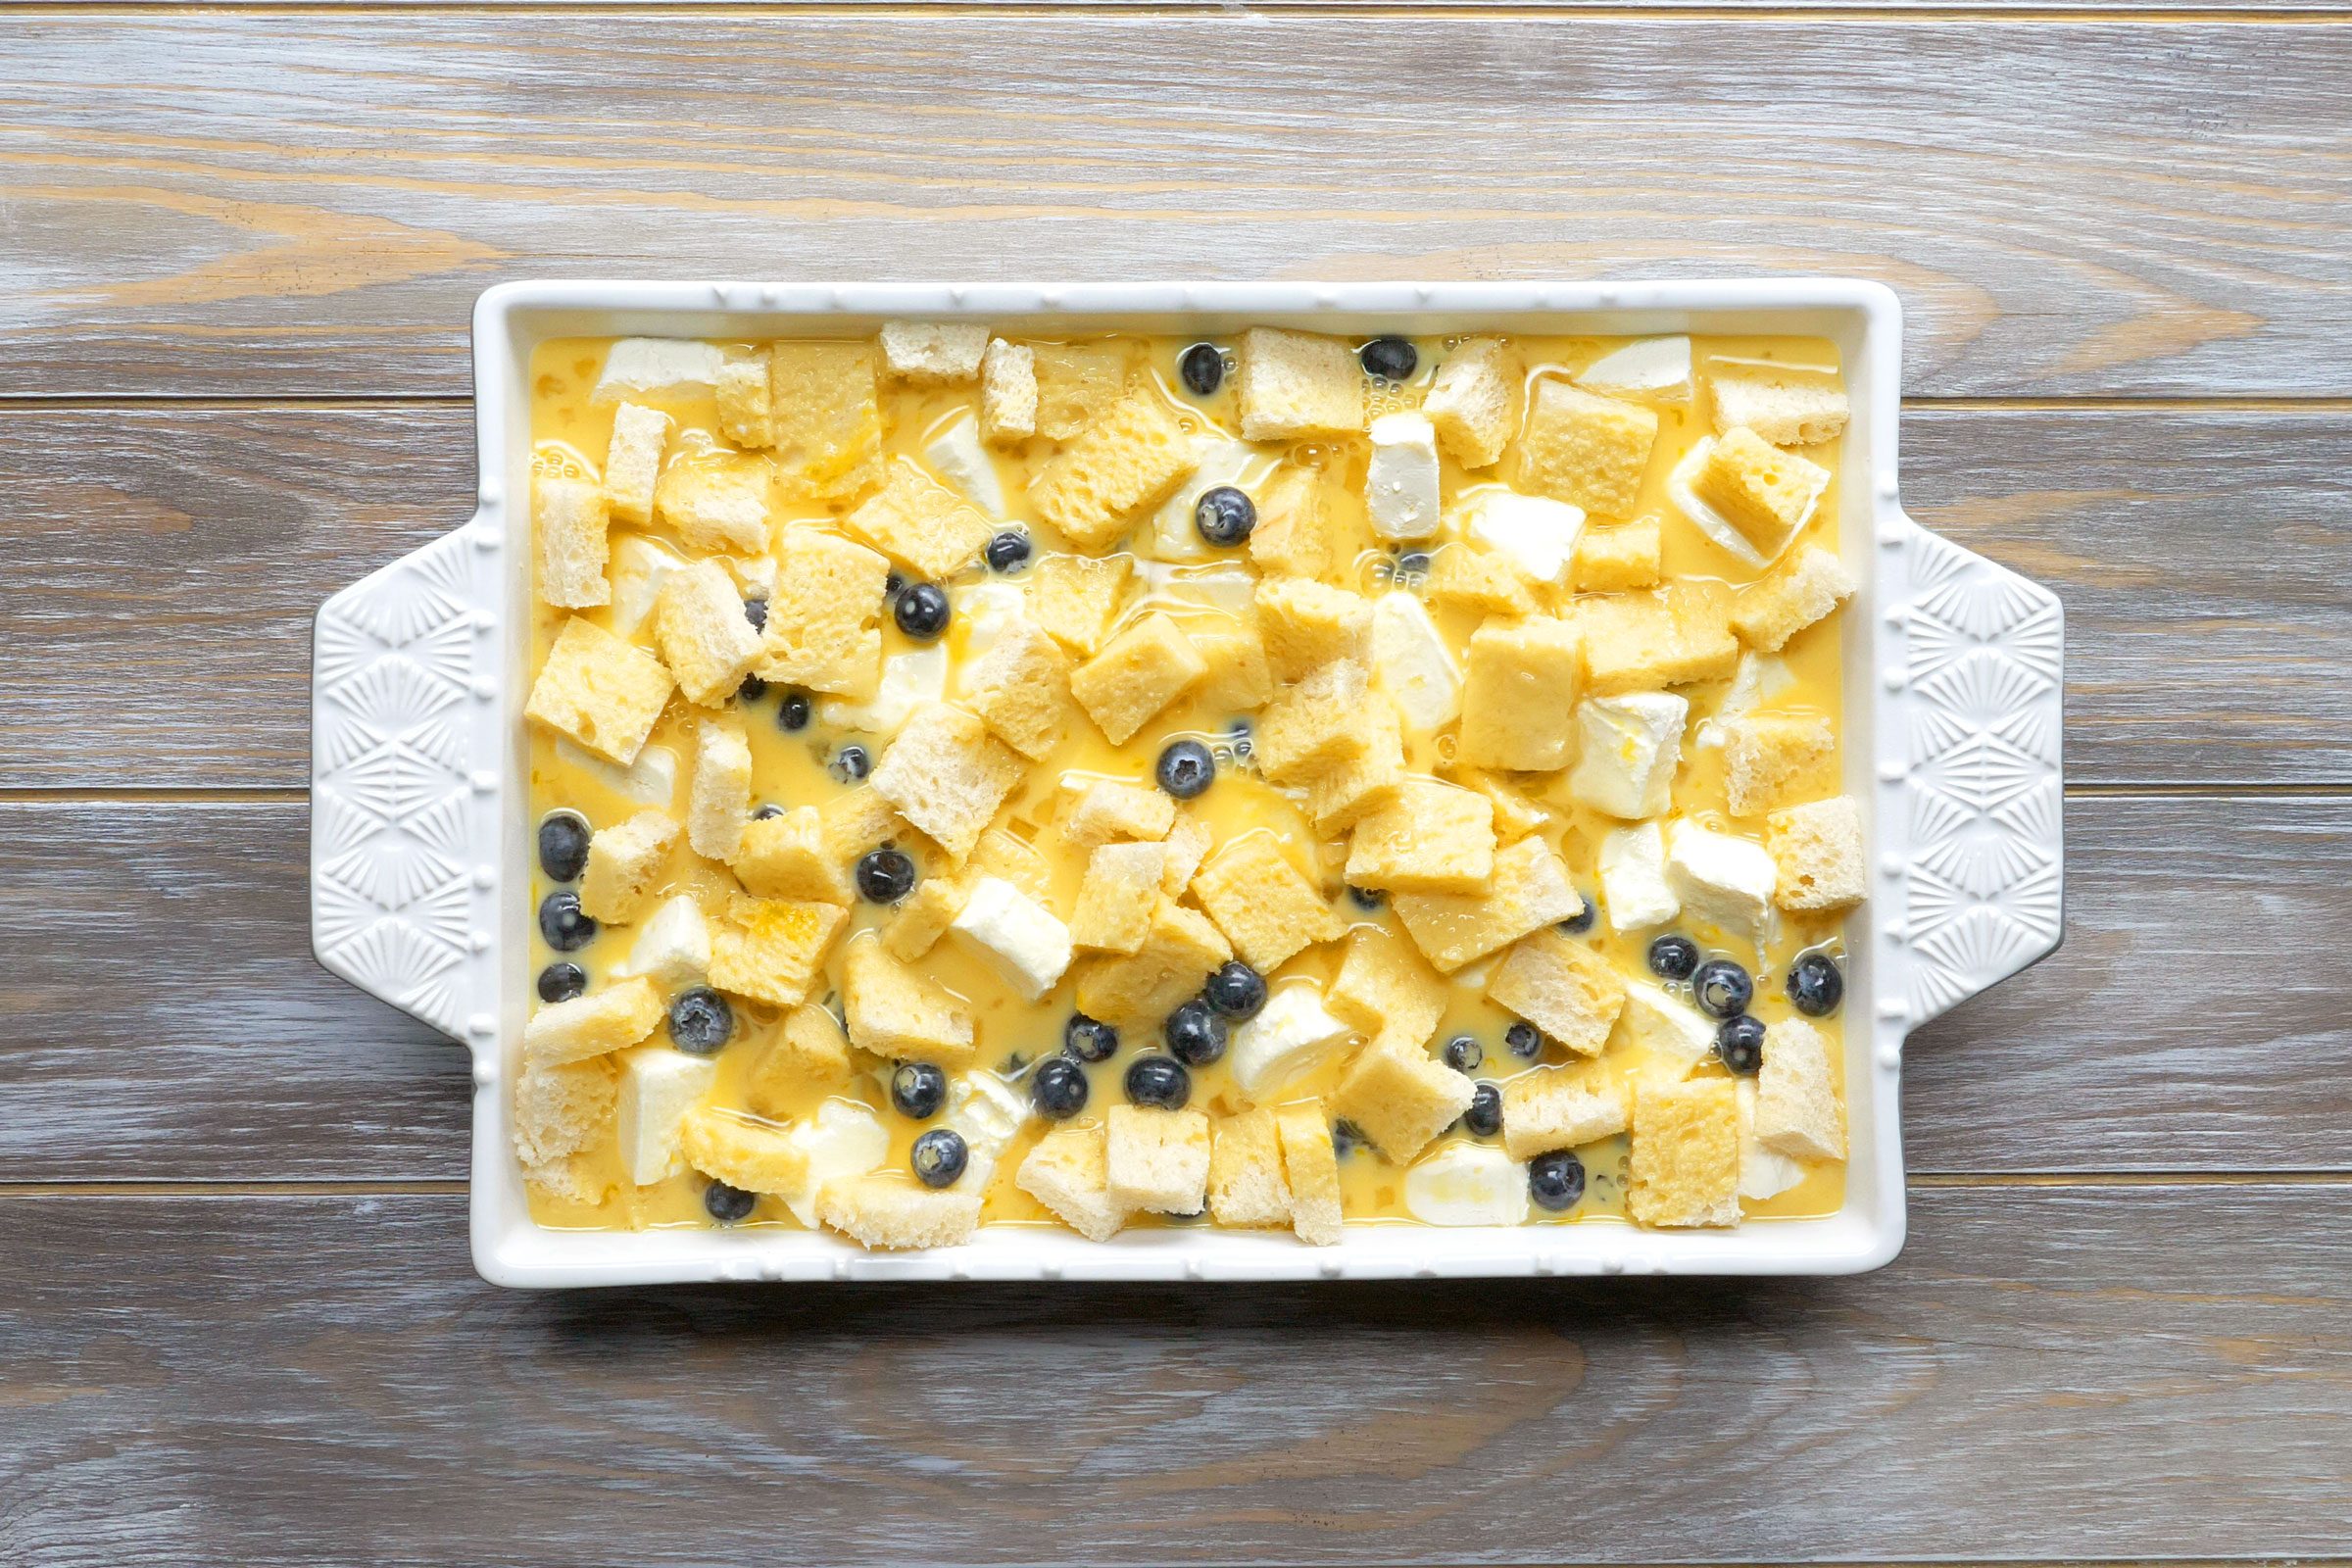  13x9-inch baking dish with blueberry french toast before baking